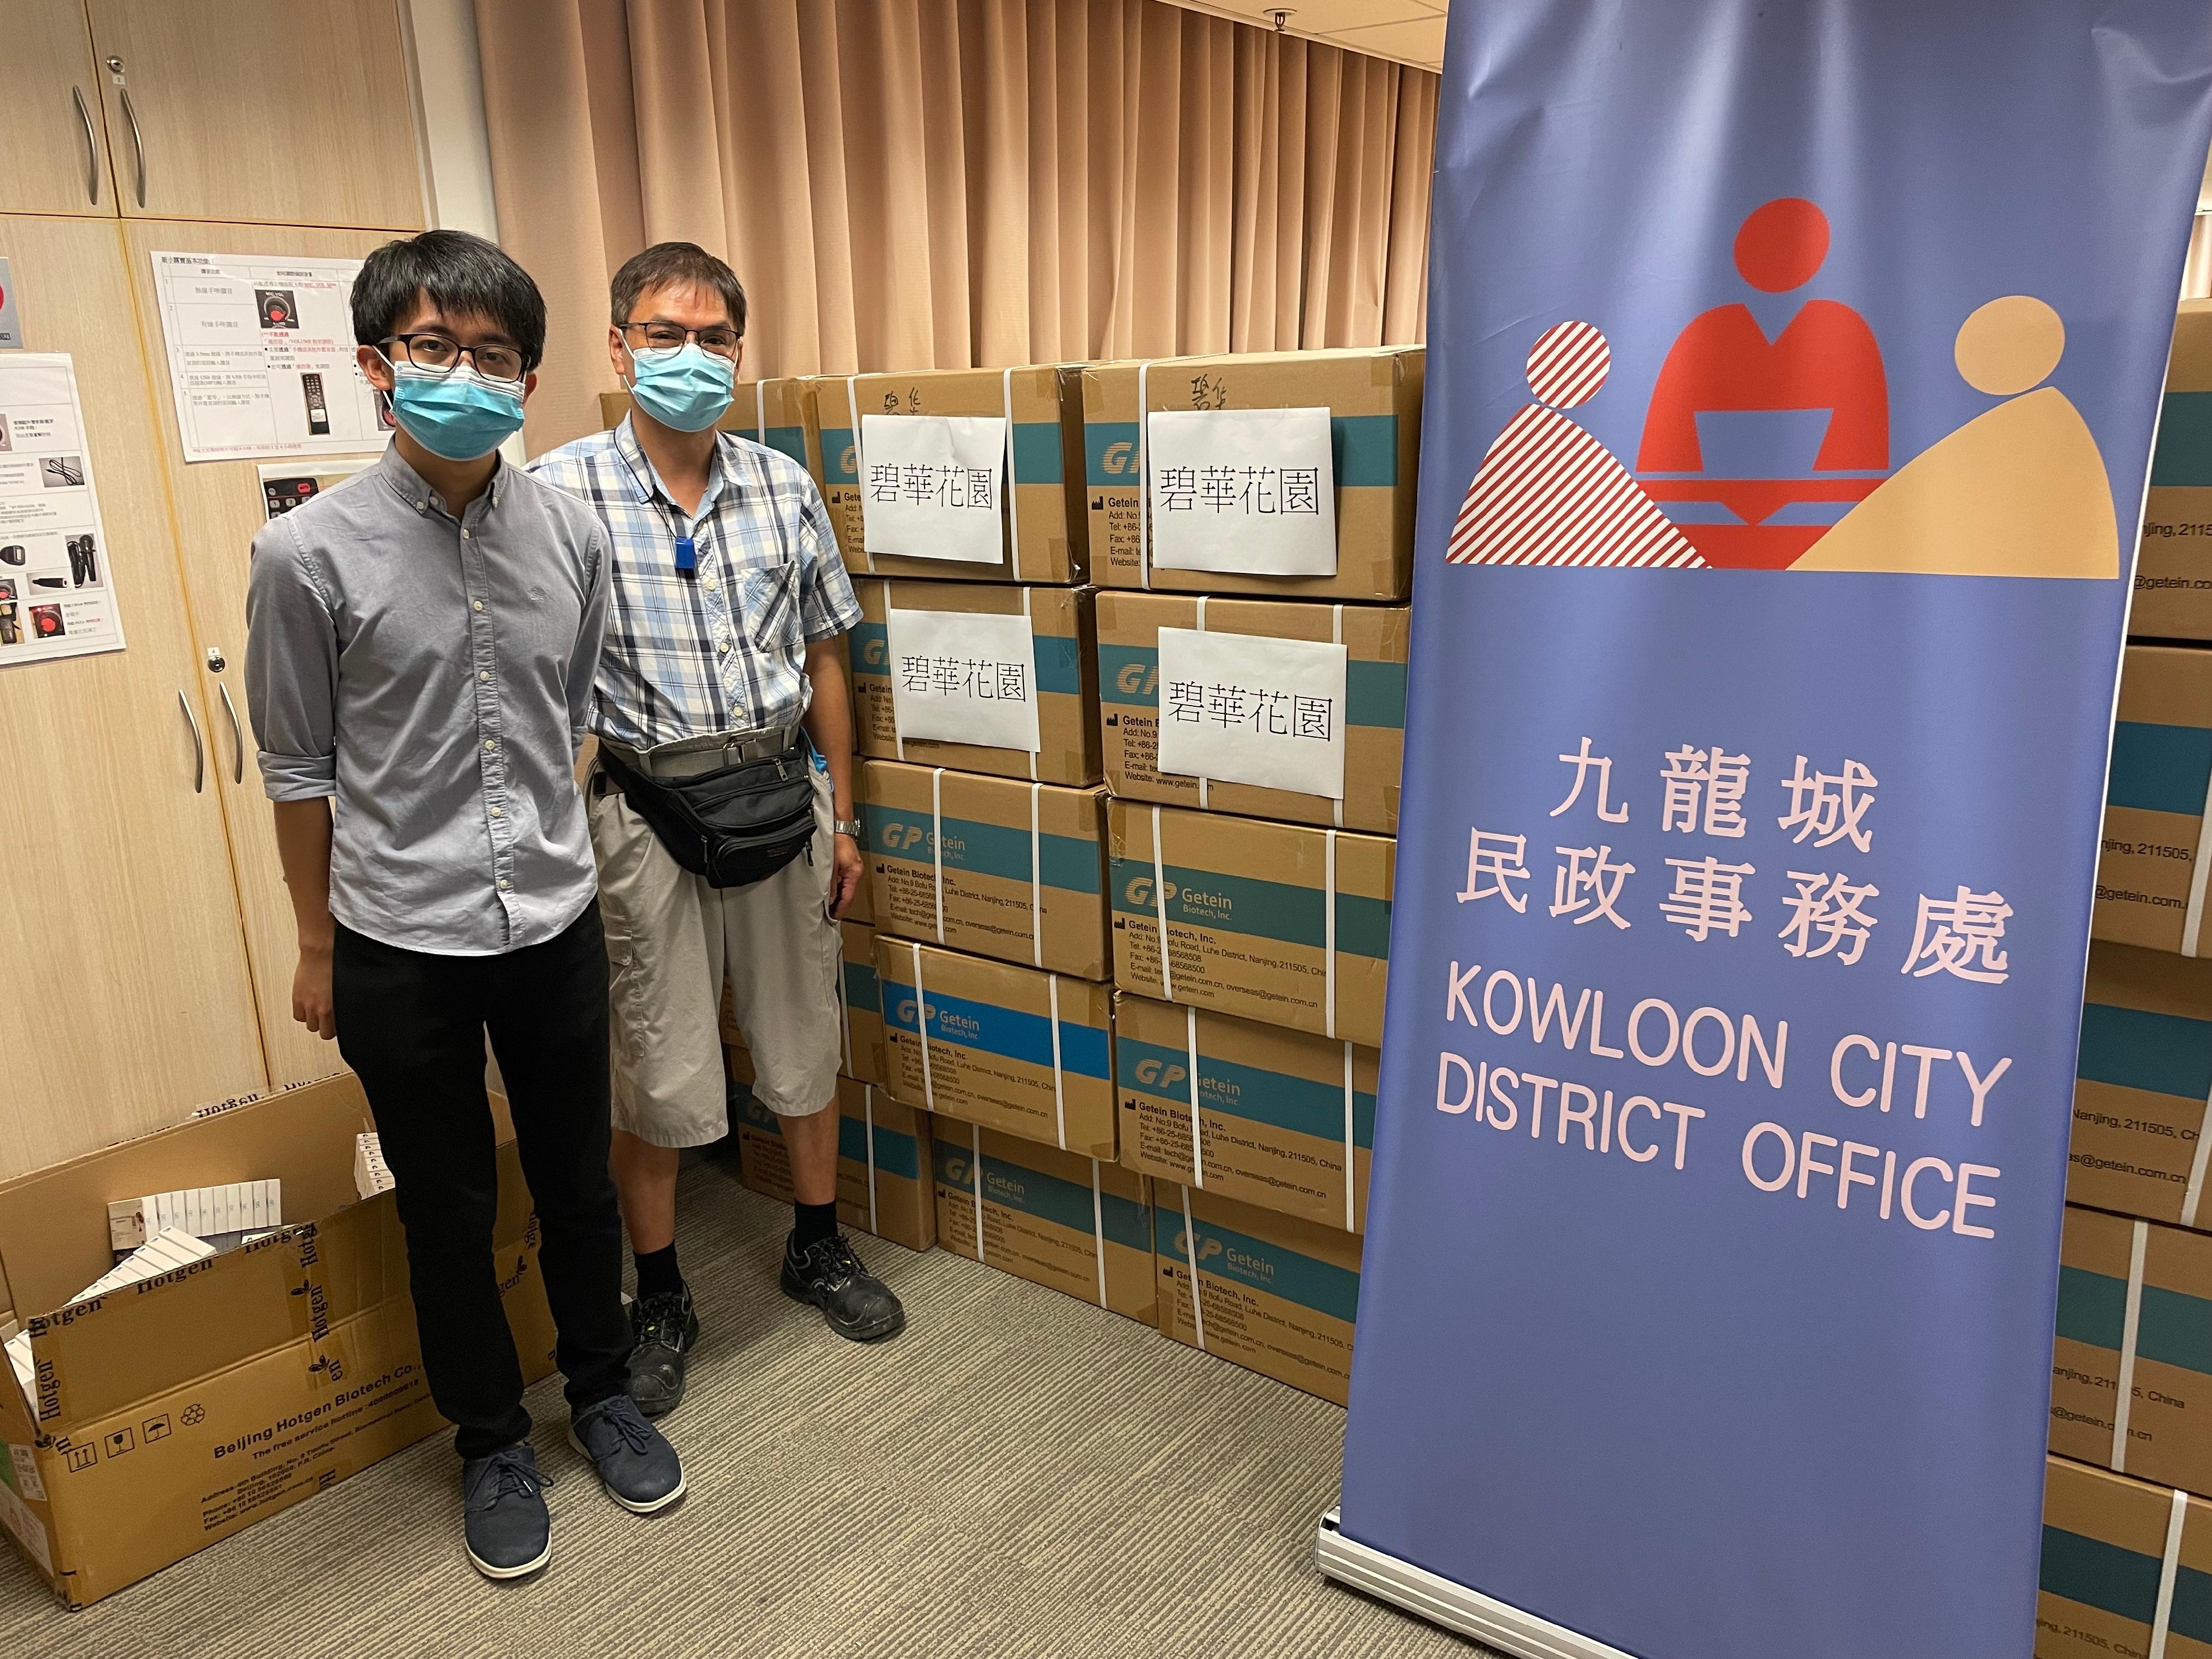 The Kowloon City District Office today (July 29) distributed COVID-19 rapid test kits to households, cleansing workers and property management staff living and working in Beverly Villas for voluntary testing through the property management company.